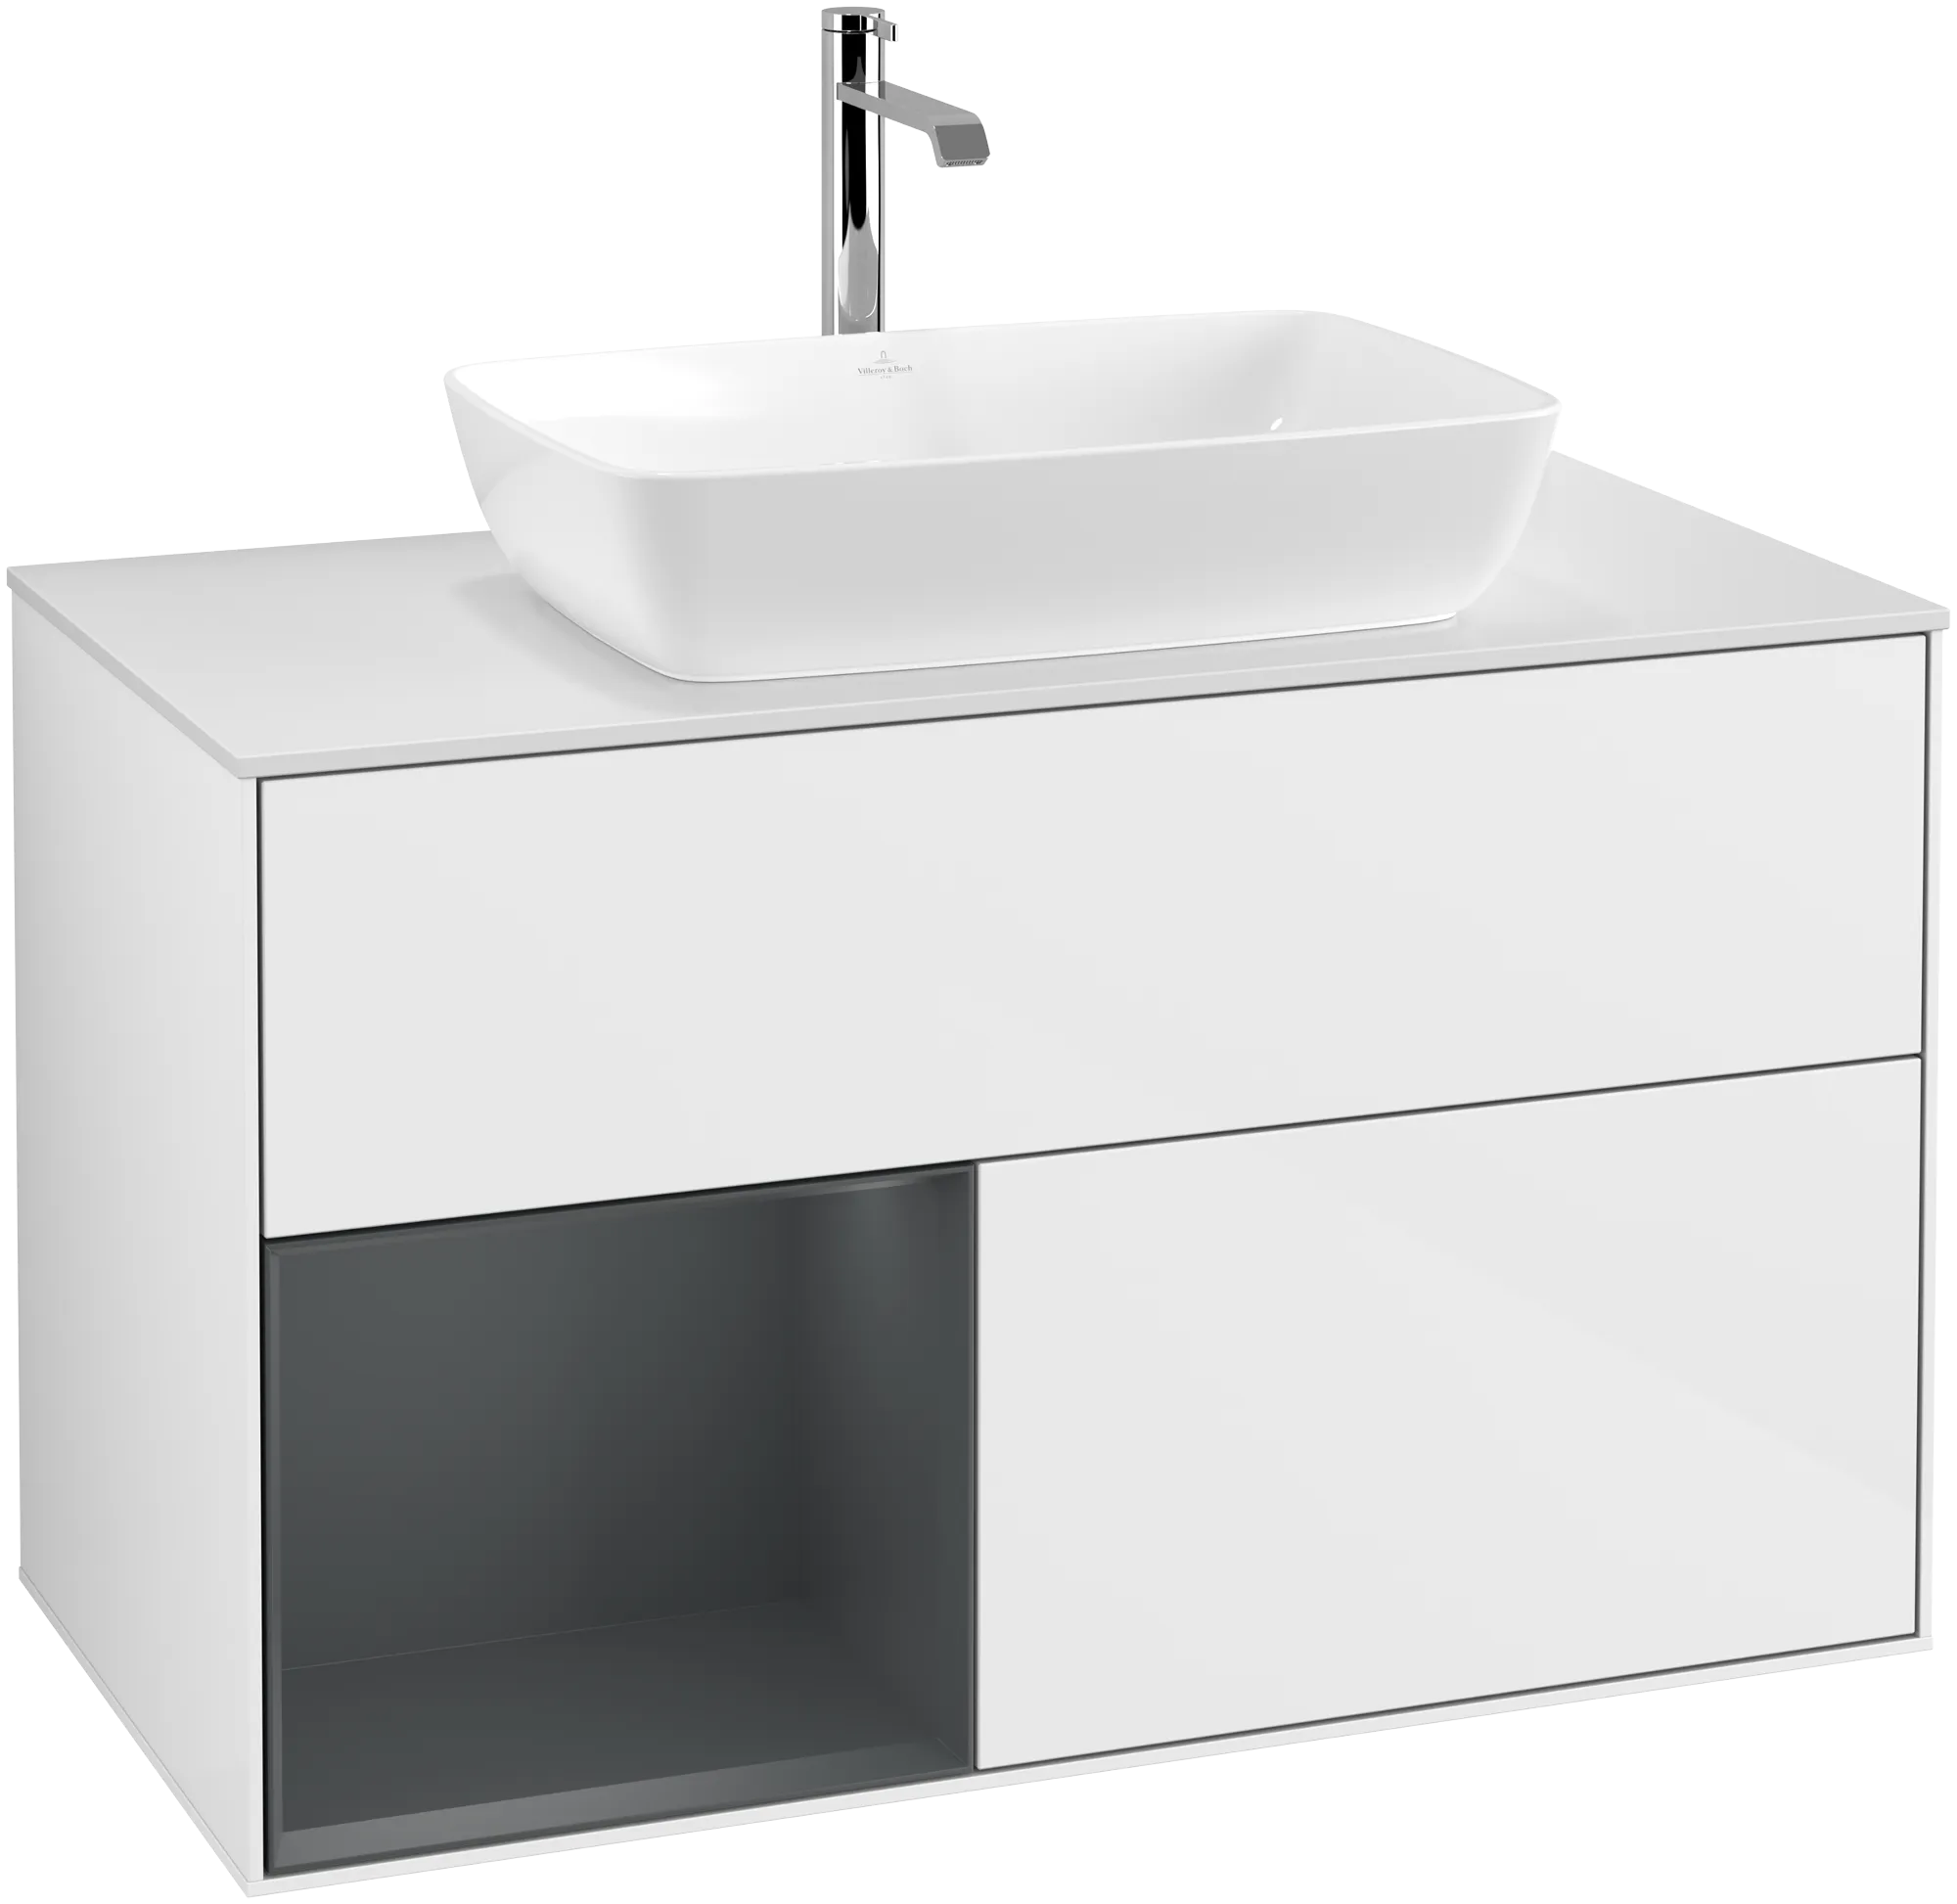 Picture of VILLEROY BOCH Finion Vanity unit, with lighting, 2 pull-out compartments, 1000 x 603 x 501 mm, Glossy White Lacquer / Midnight Blue Matt Lacquer / Glass White Matt #G771HGGF